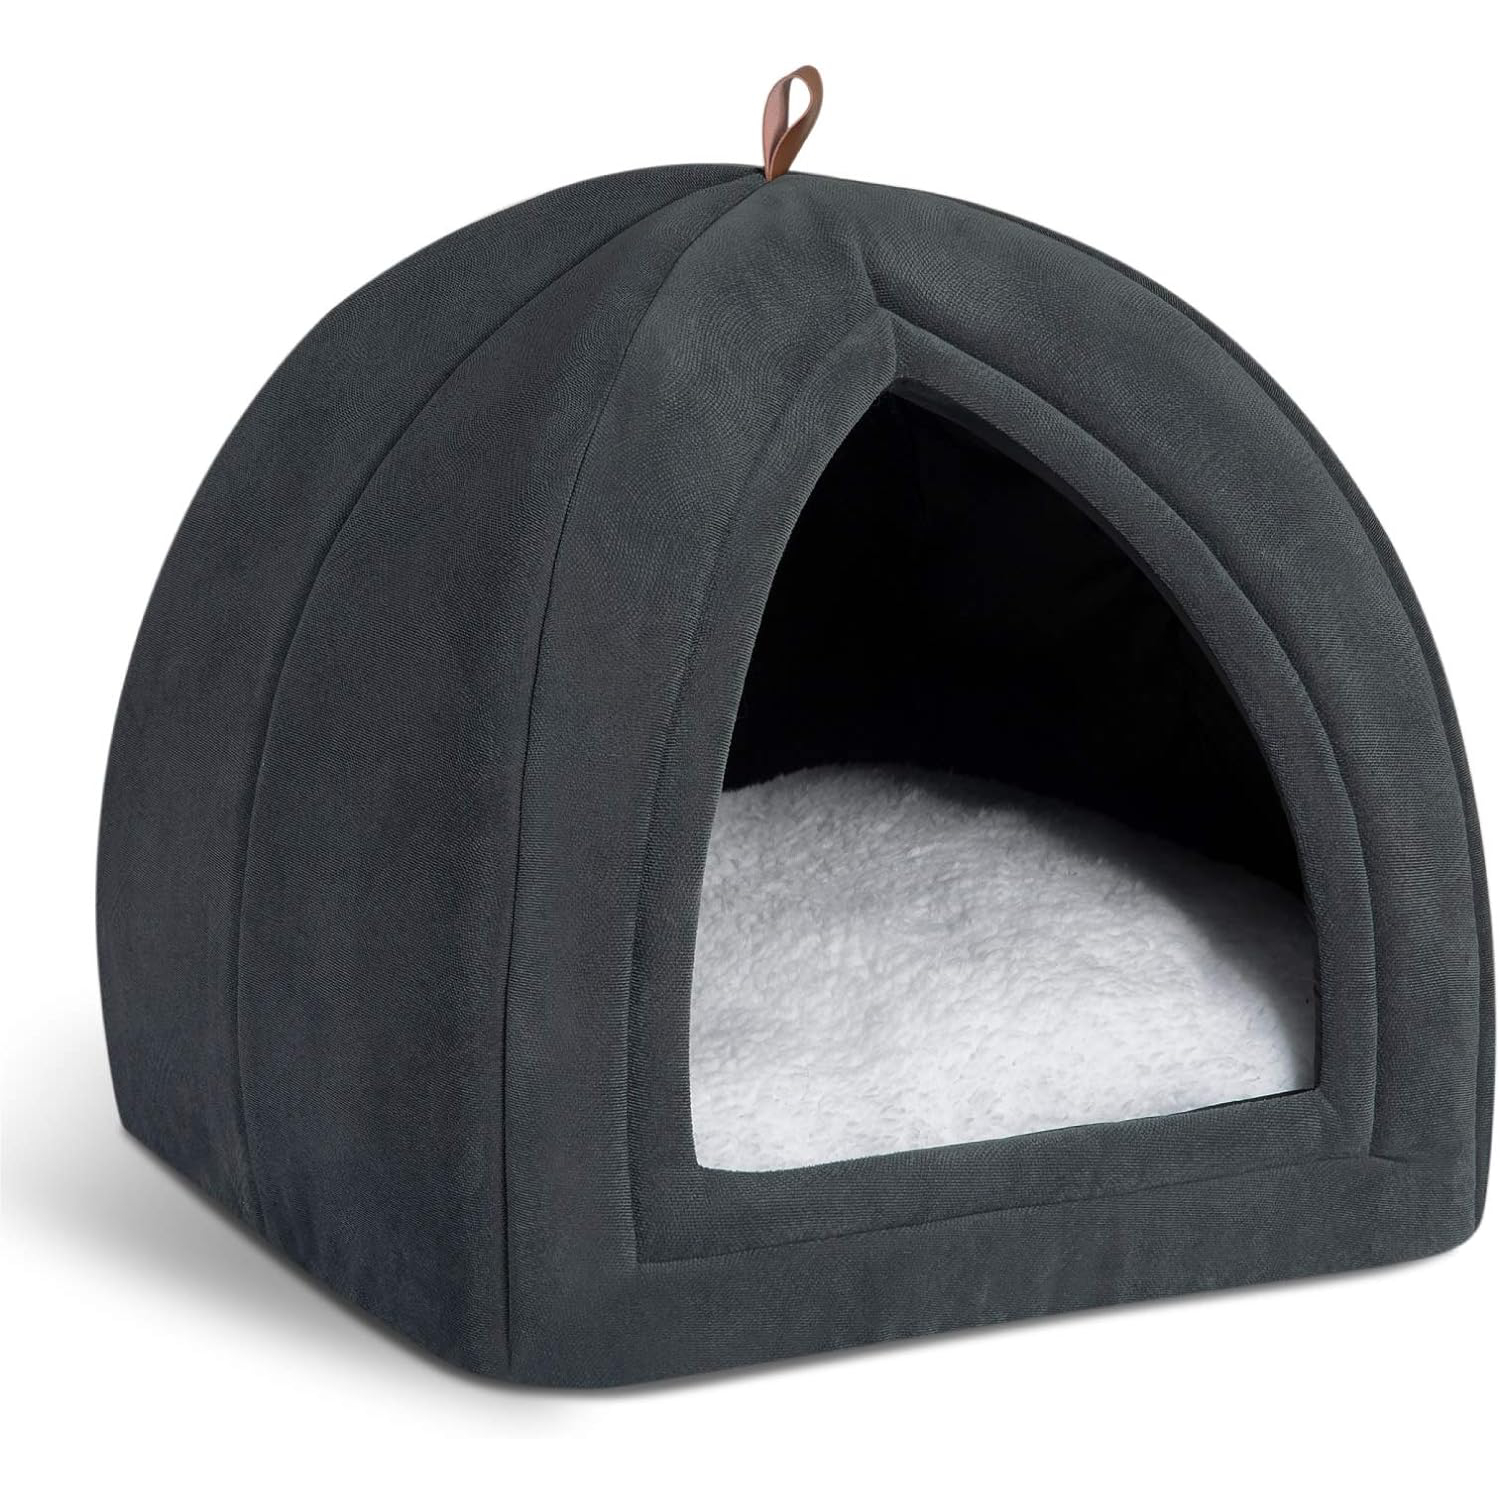 Bedsure Cat Beds for Indoor Cats New